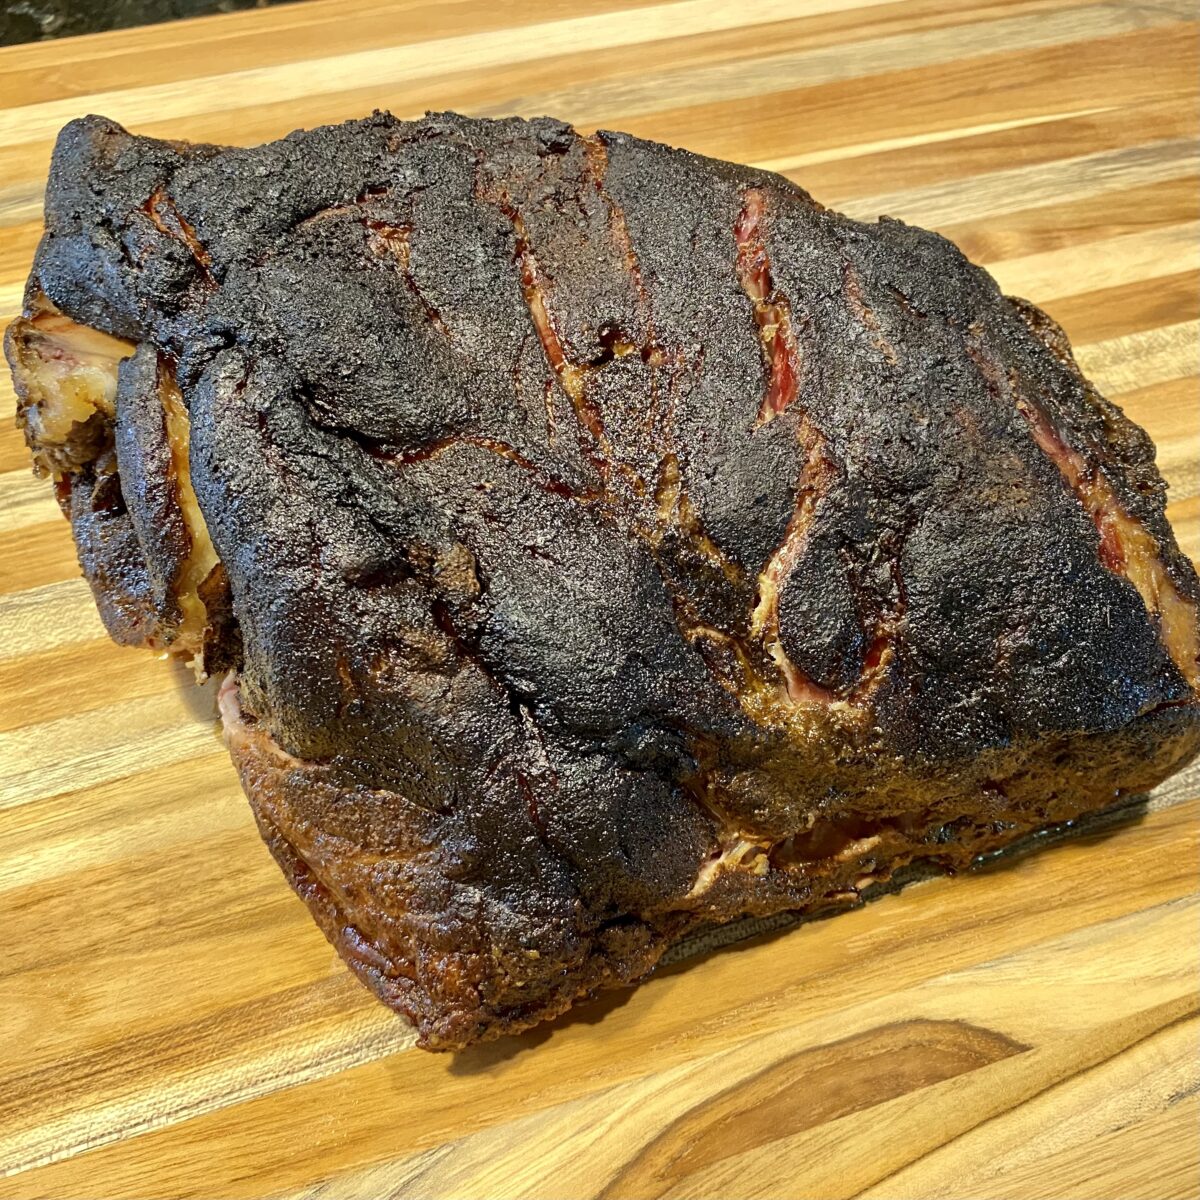 Top view of smoked pork butt resting on a wooden cutting board about to be pulled into pulled pork.